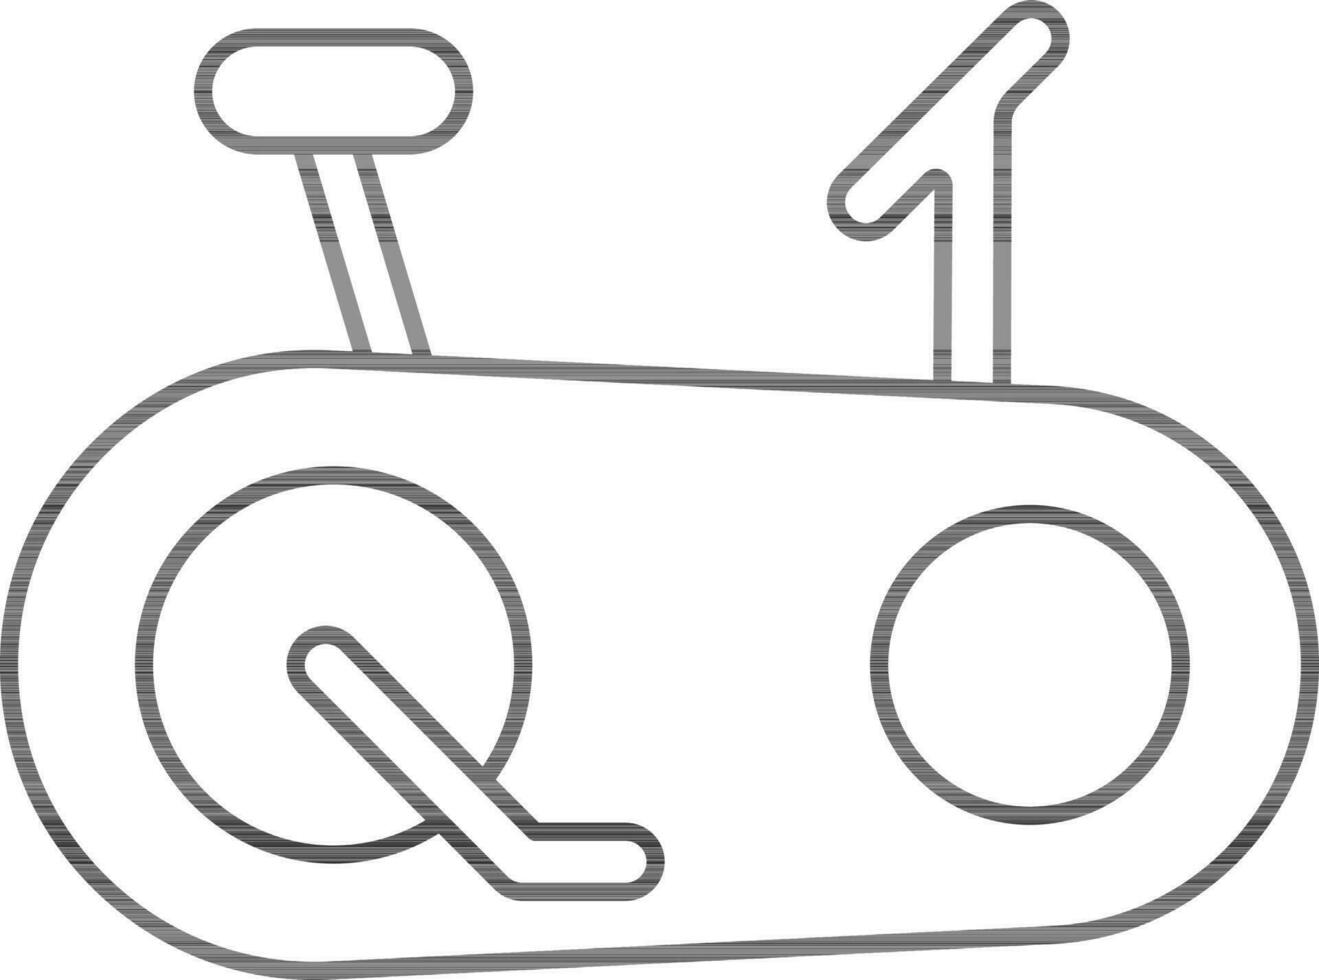 Exercise Bike Icon In Black Outline. vector